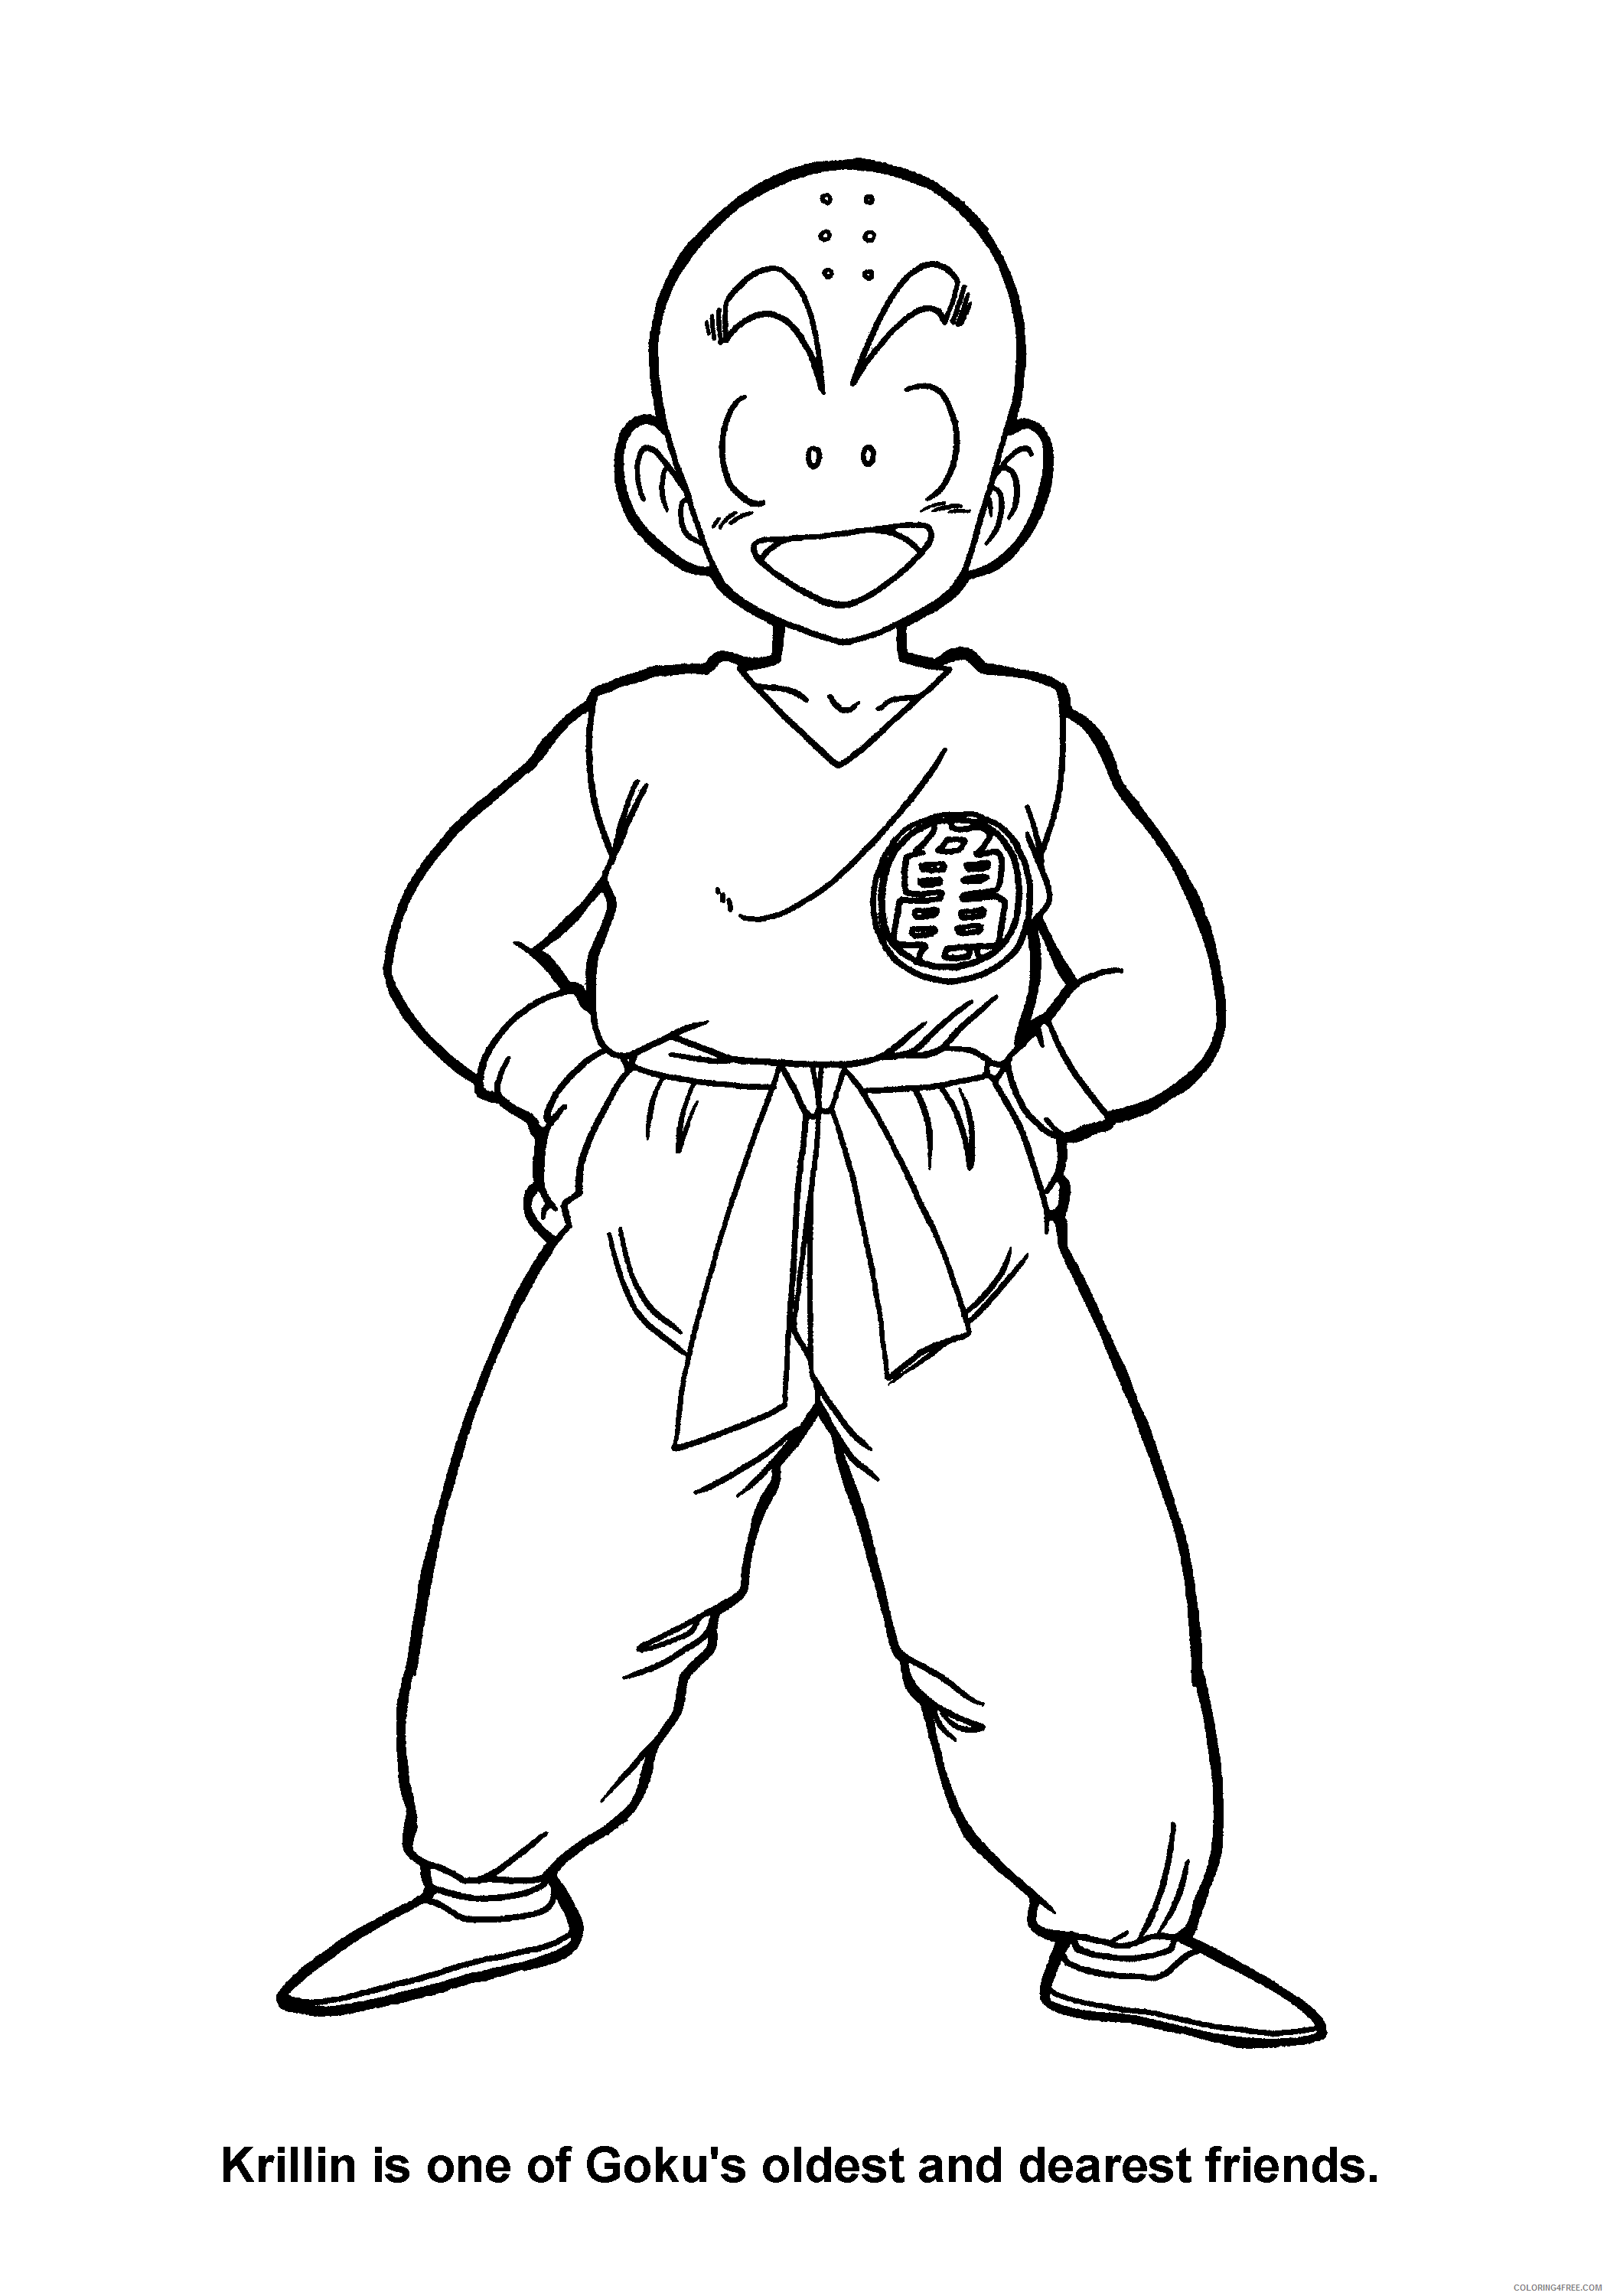 064 dragon ball z krillin is one of gokus oldest and dearest friends Printable Coloring4free